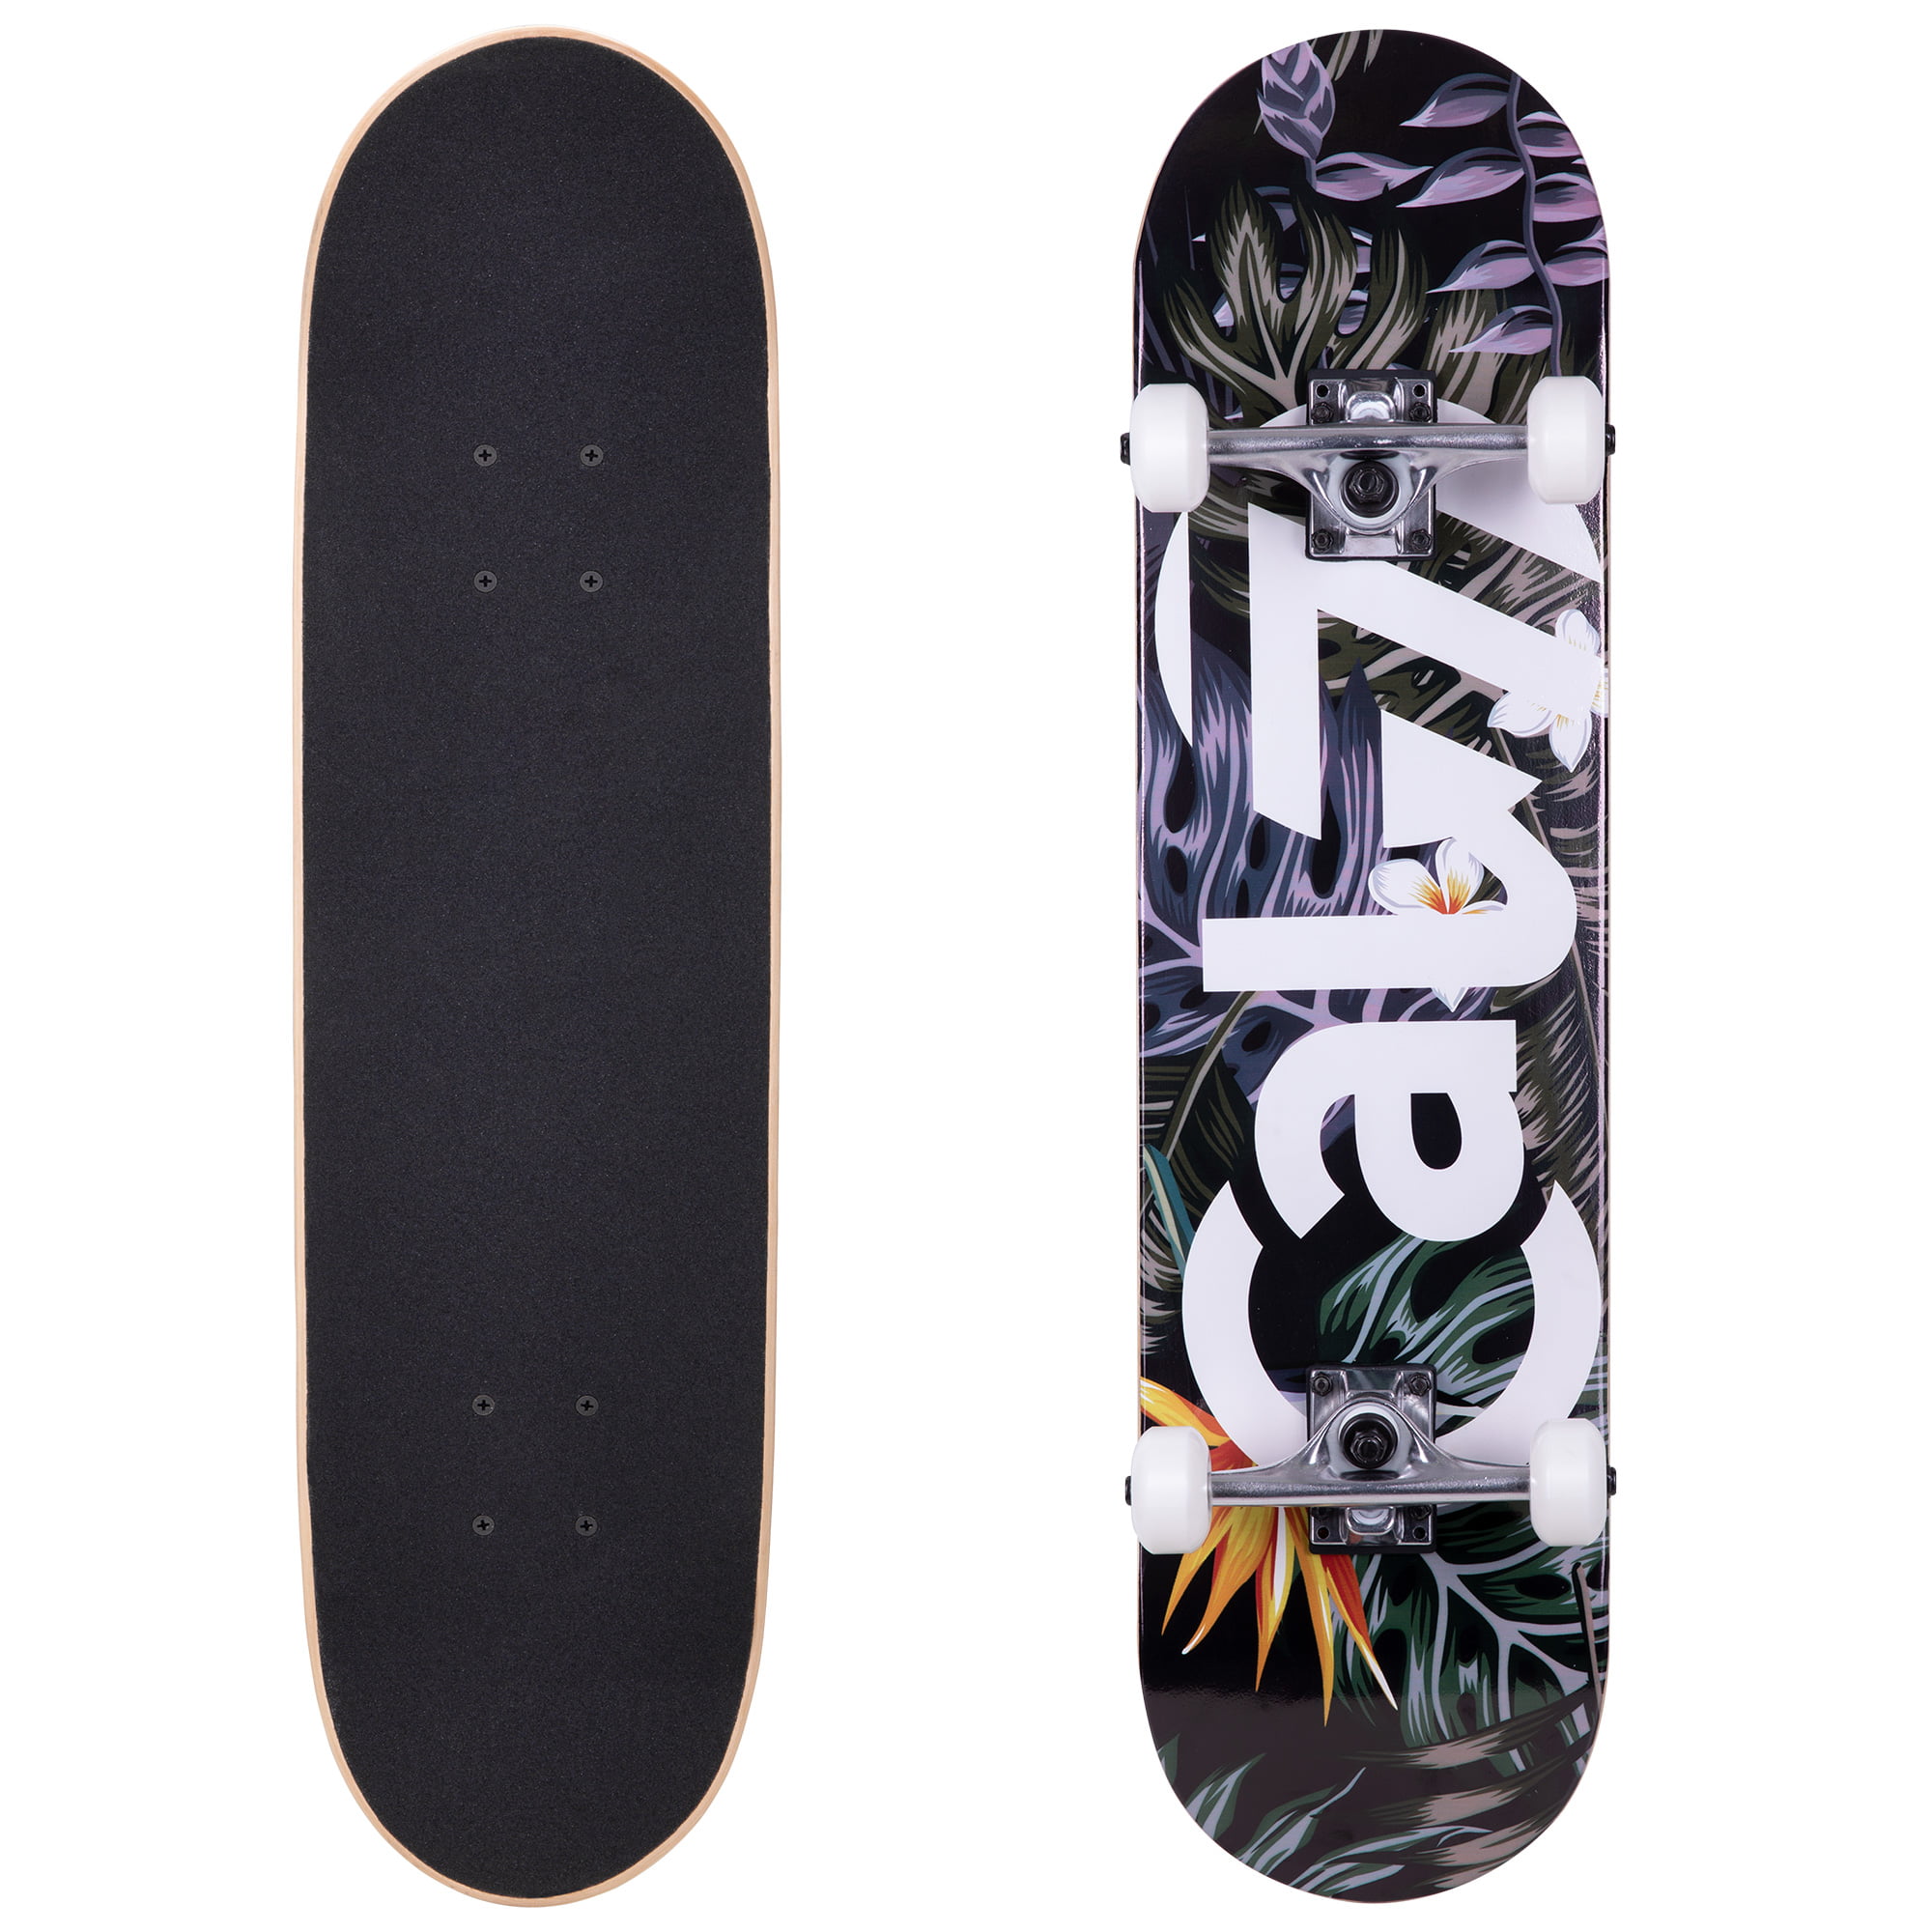 Cal 7 Complete Skateboard, Popsicle Double Kicktail Maple Deck, Skate Styles in Graphic Designs (8&quot; Cabana)